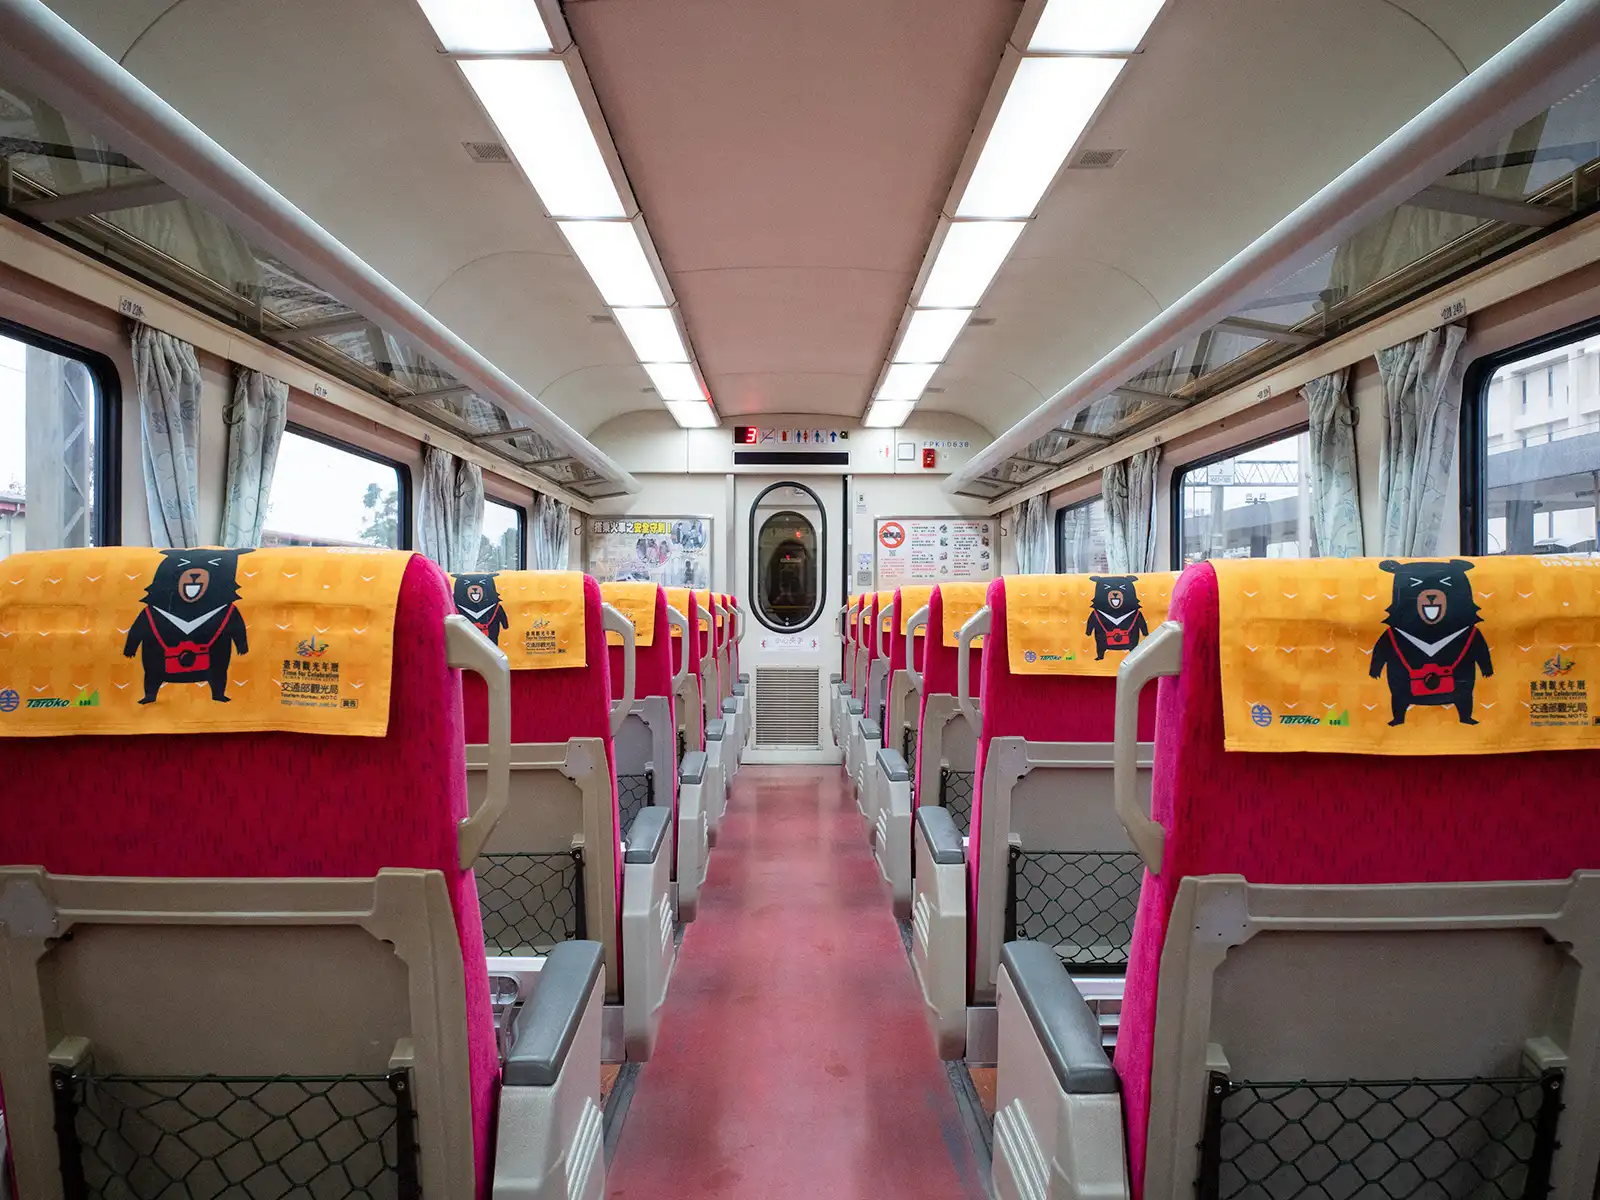 The interior of a train cabin features two rows of seats on either side of the aisle.